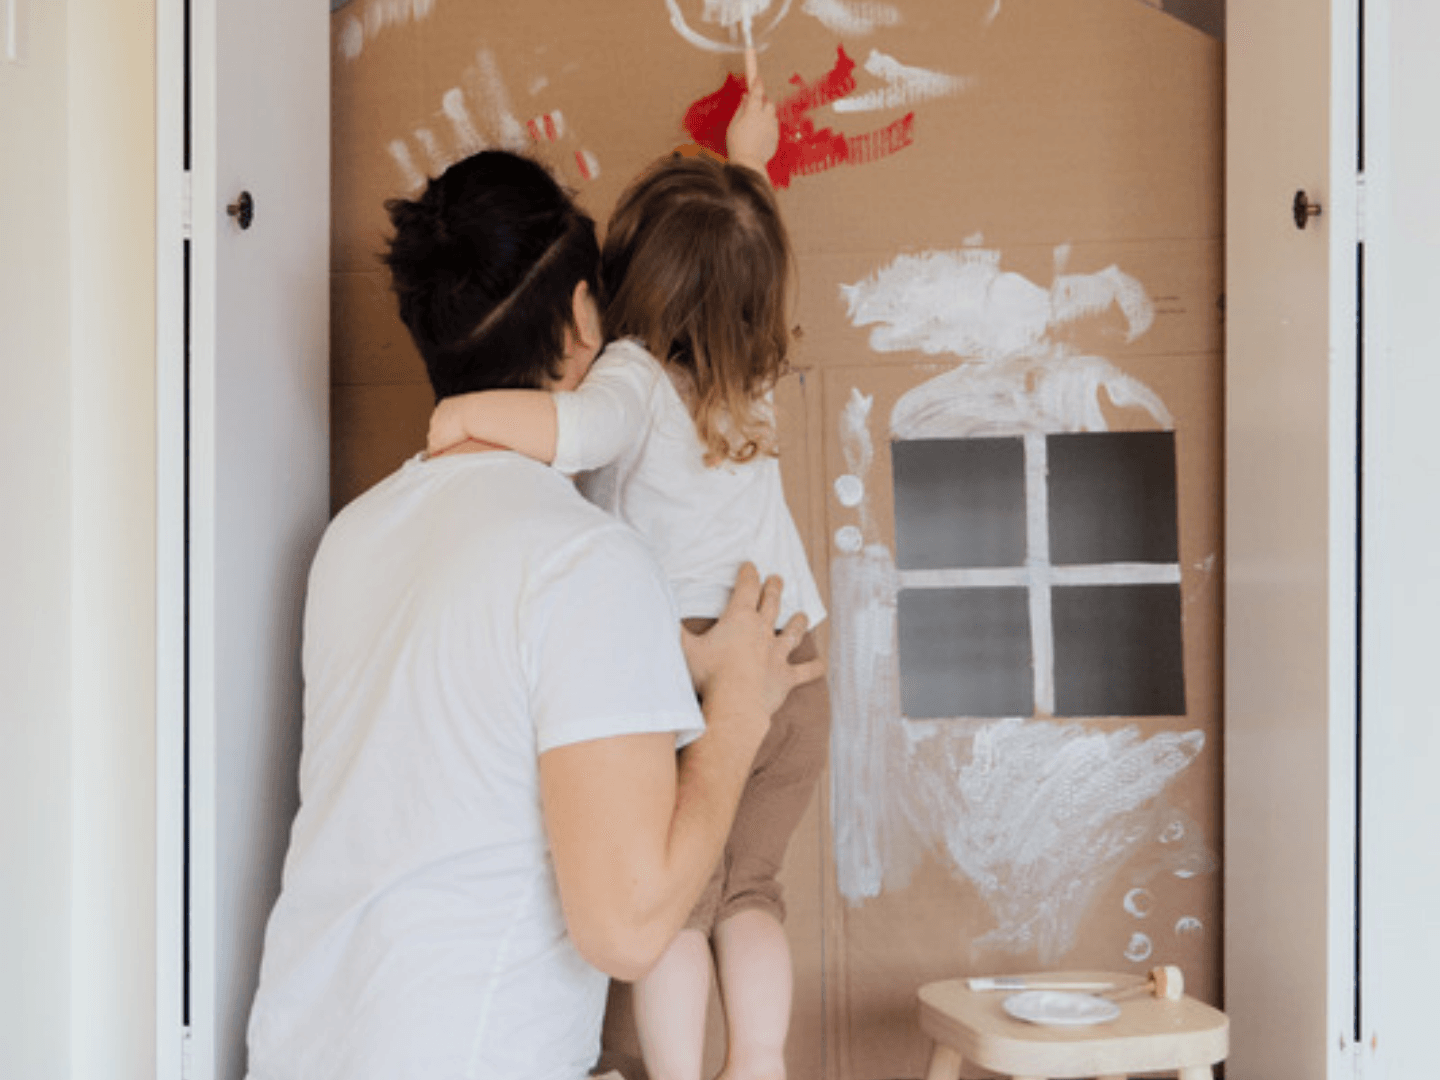 Father and child painting a cardboard house together for their family home project goal.